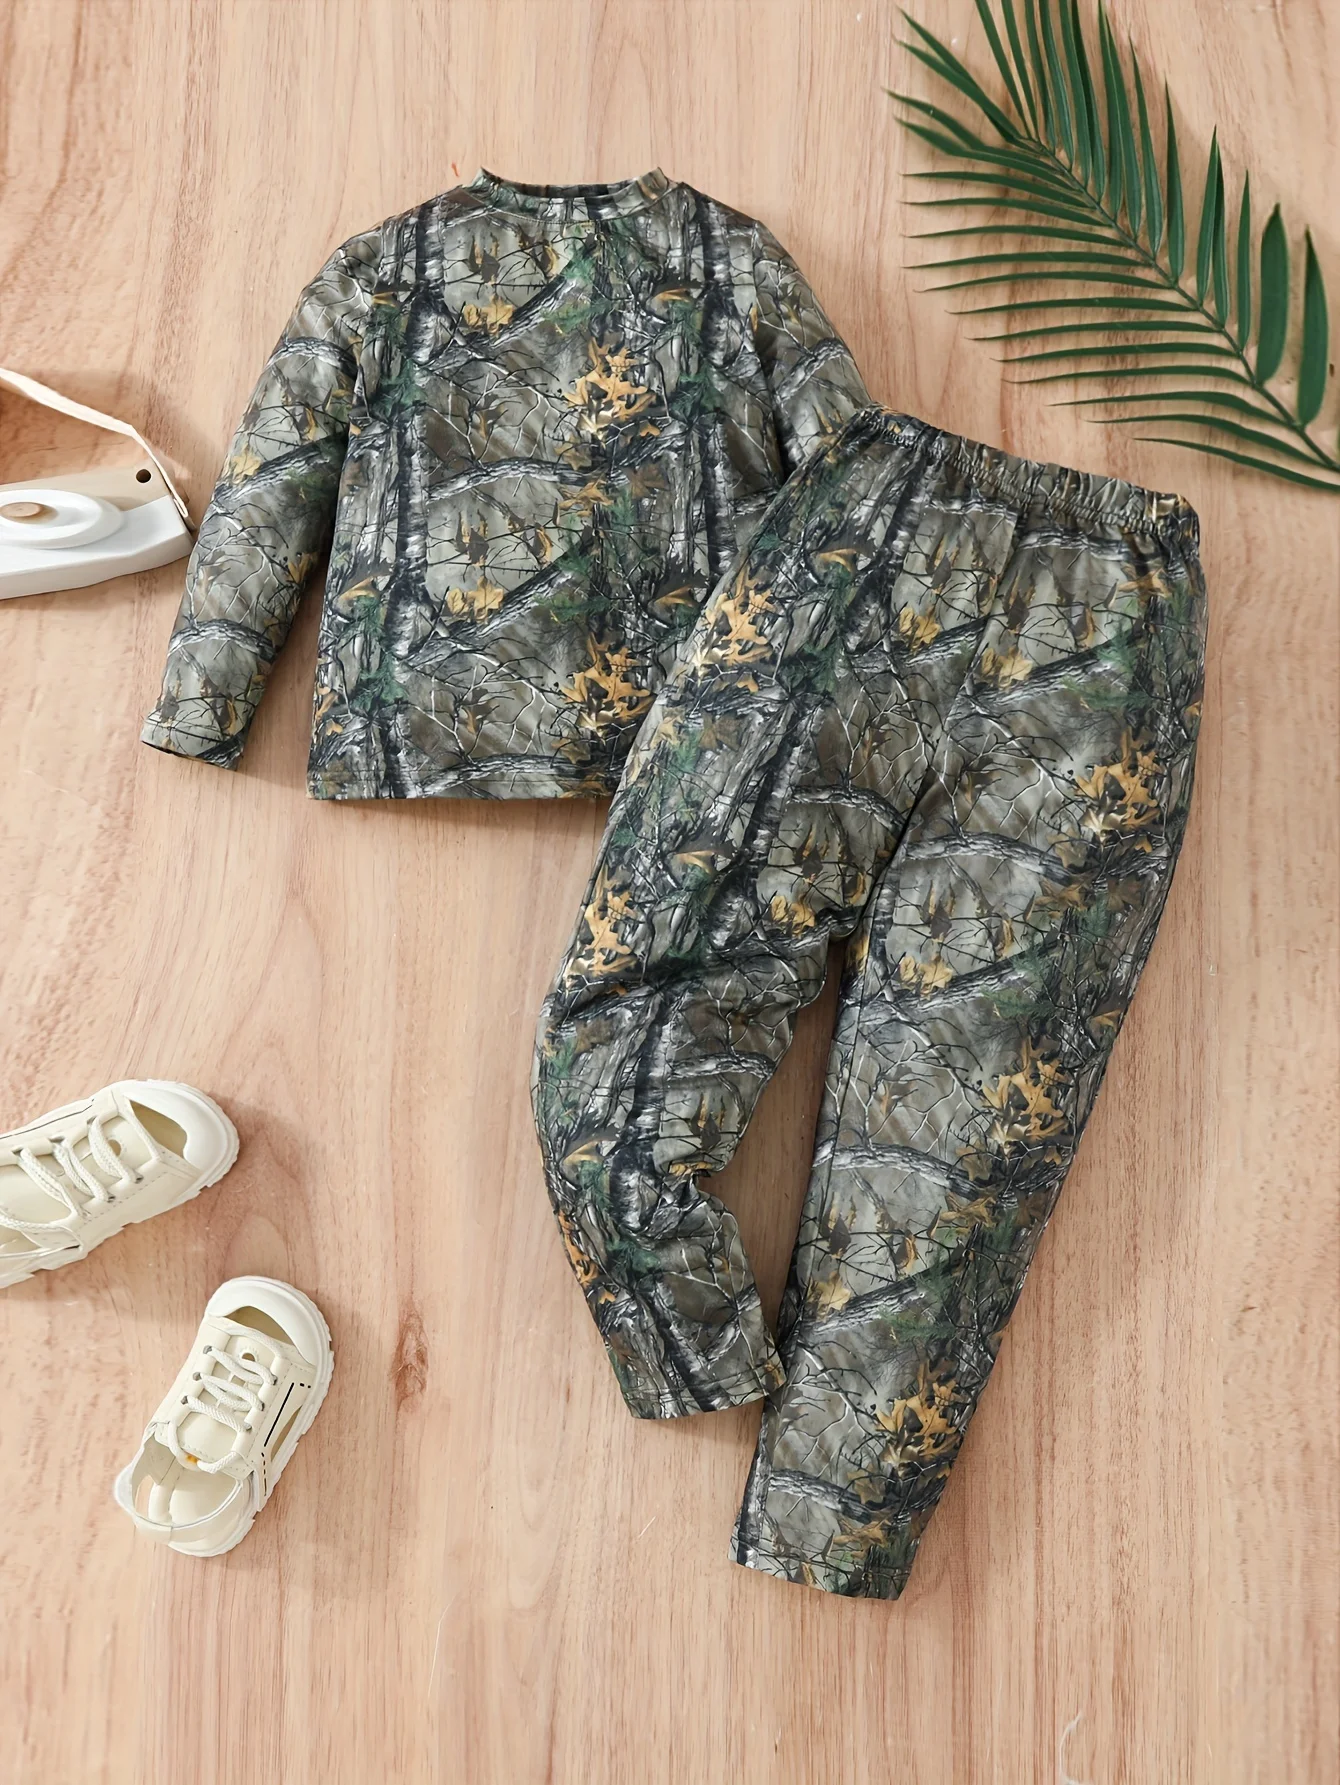 

Boys 2-piece Trendy Pajama Sets Allover 3D Fallen Leaves Pattern Round Neck Long Sleeve Top & Matching Pants Comfy Casual PJ Set